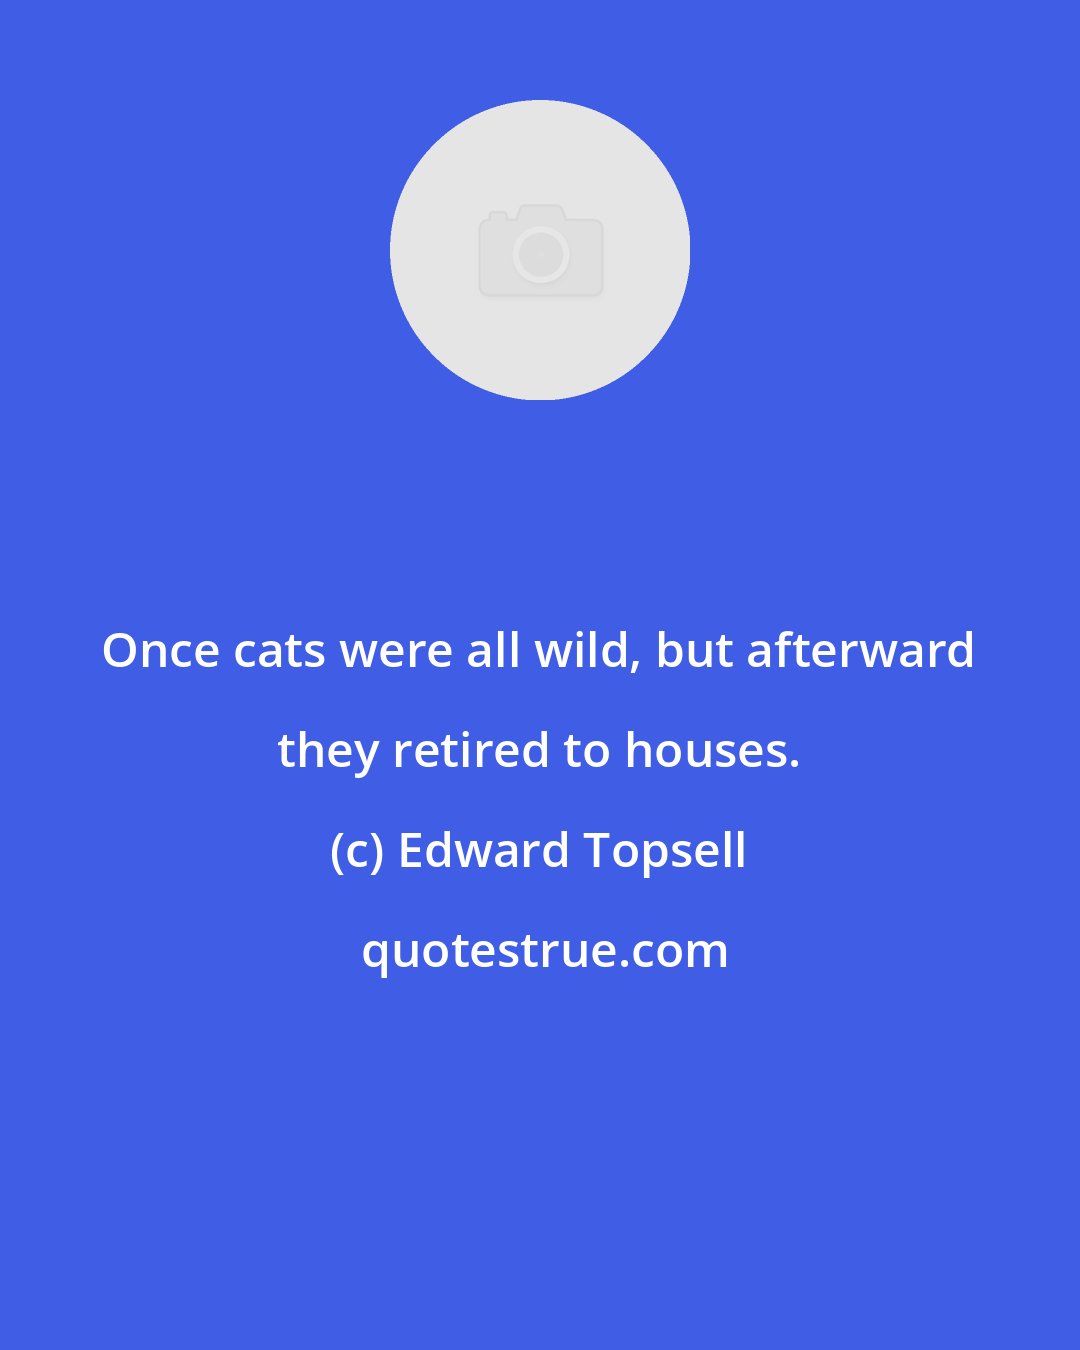 Edward Topsell: Once cats were all wild, but afterward they retired to houses.